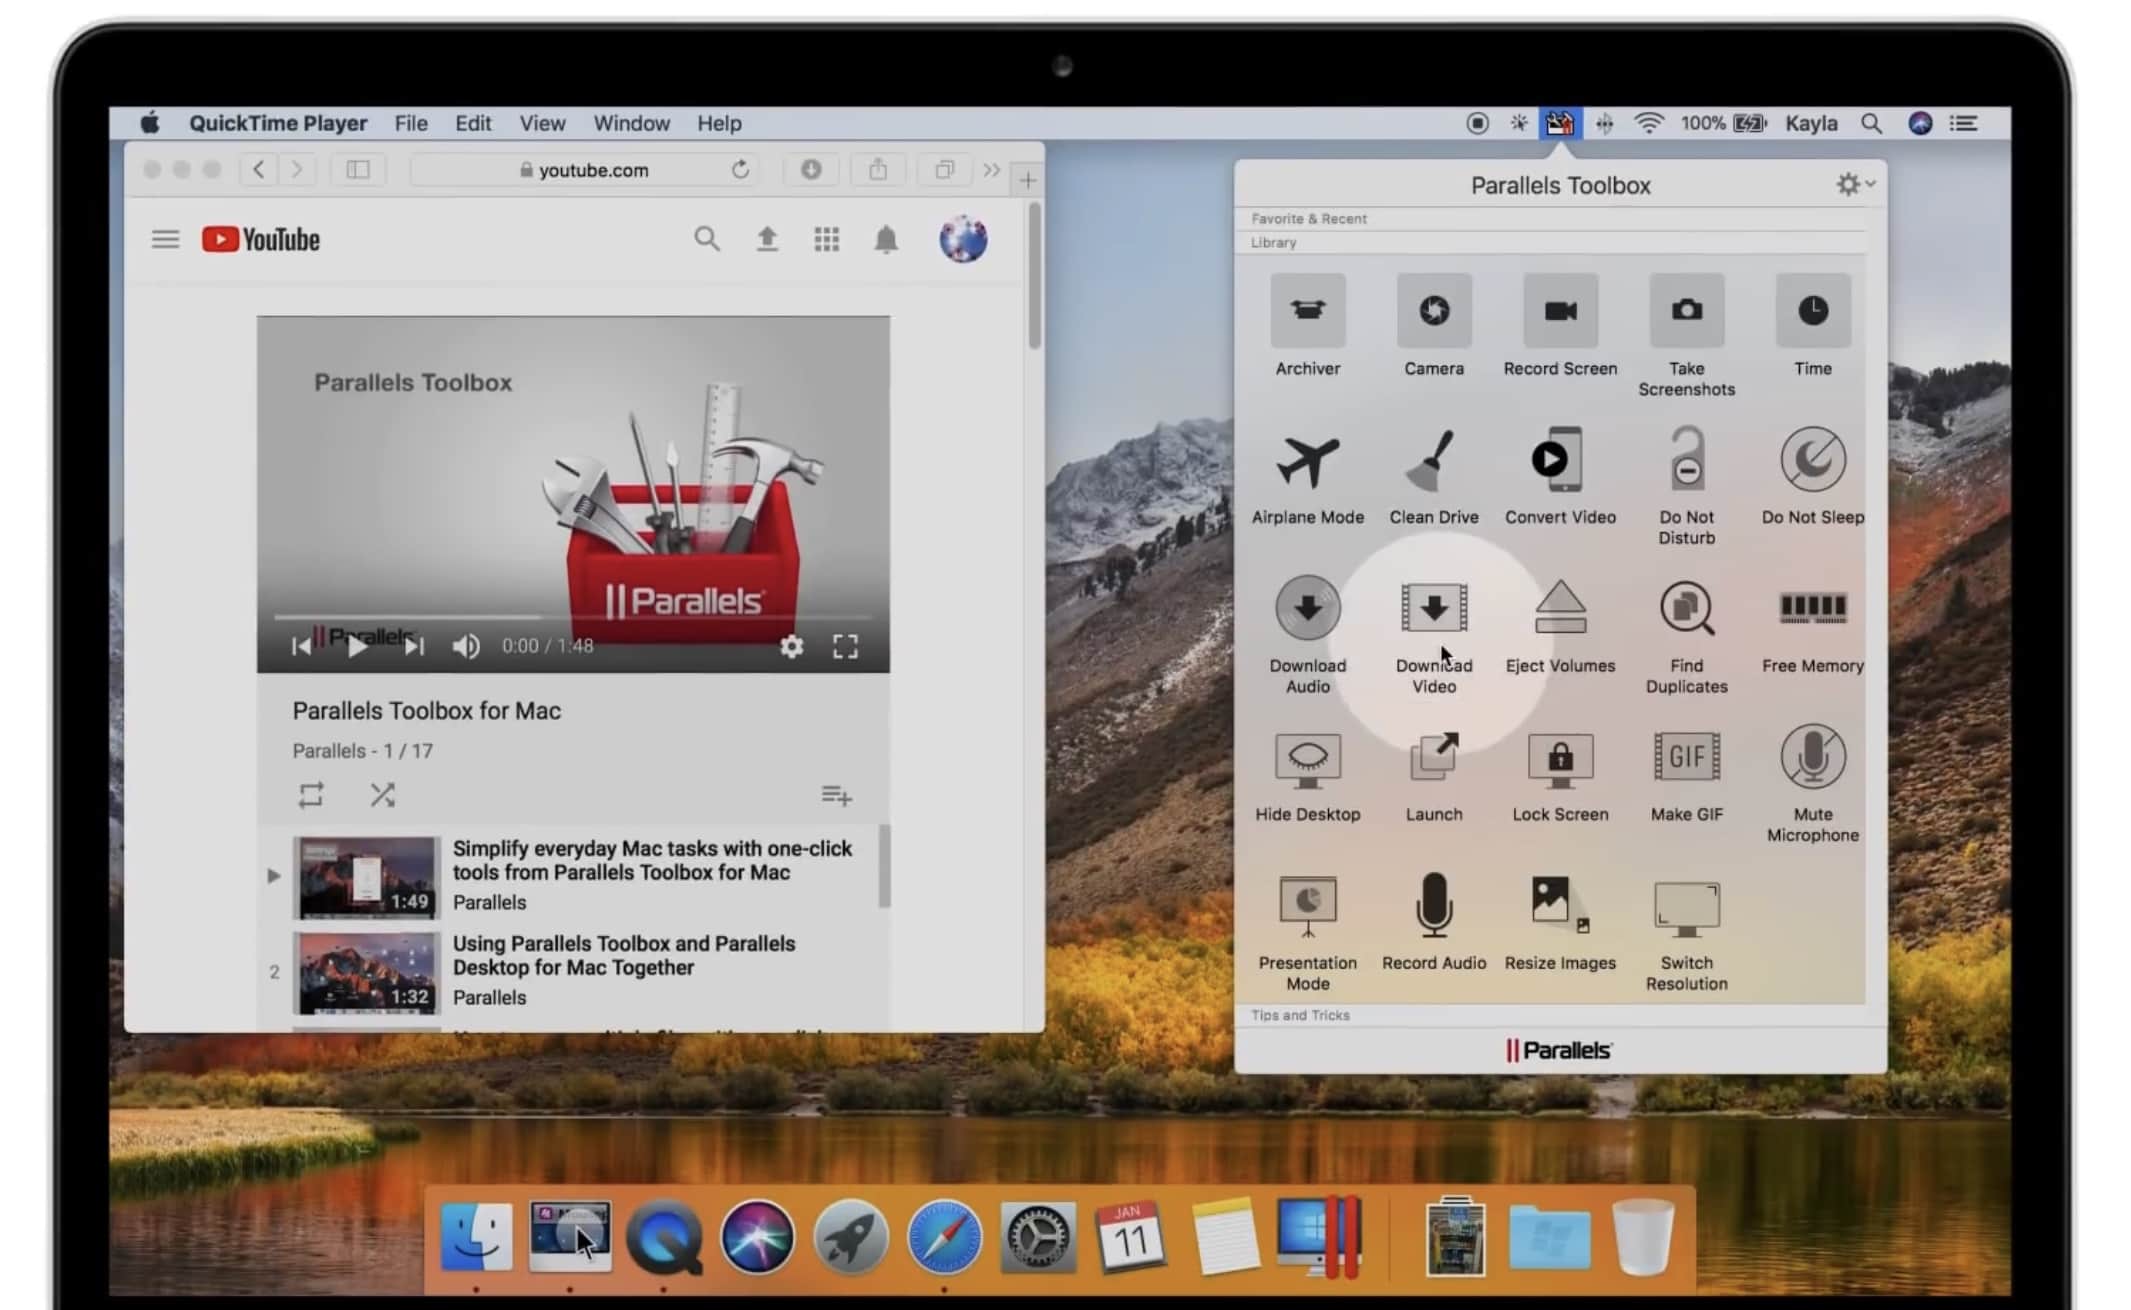 Parallels-Toolbox